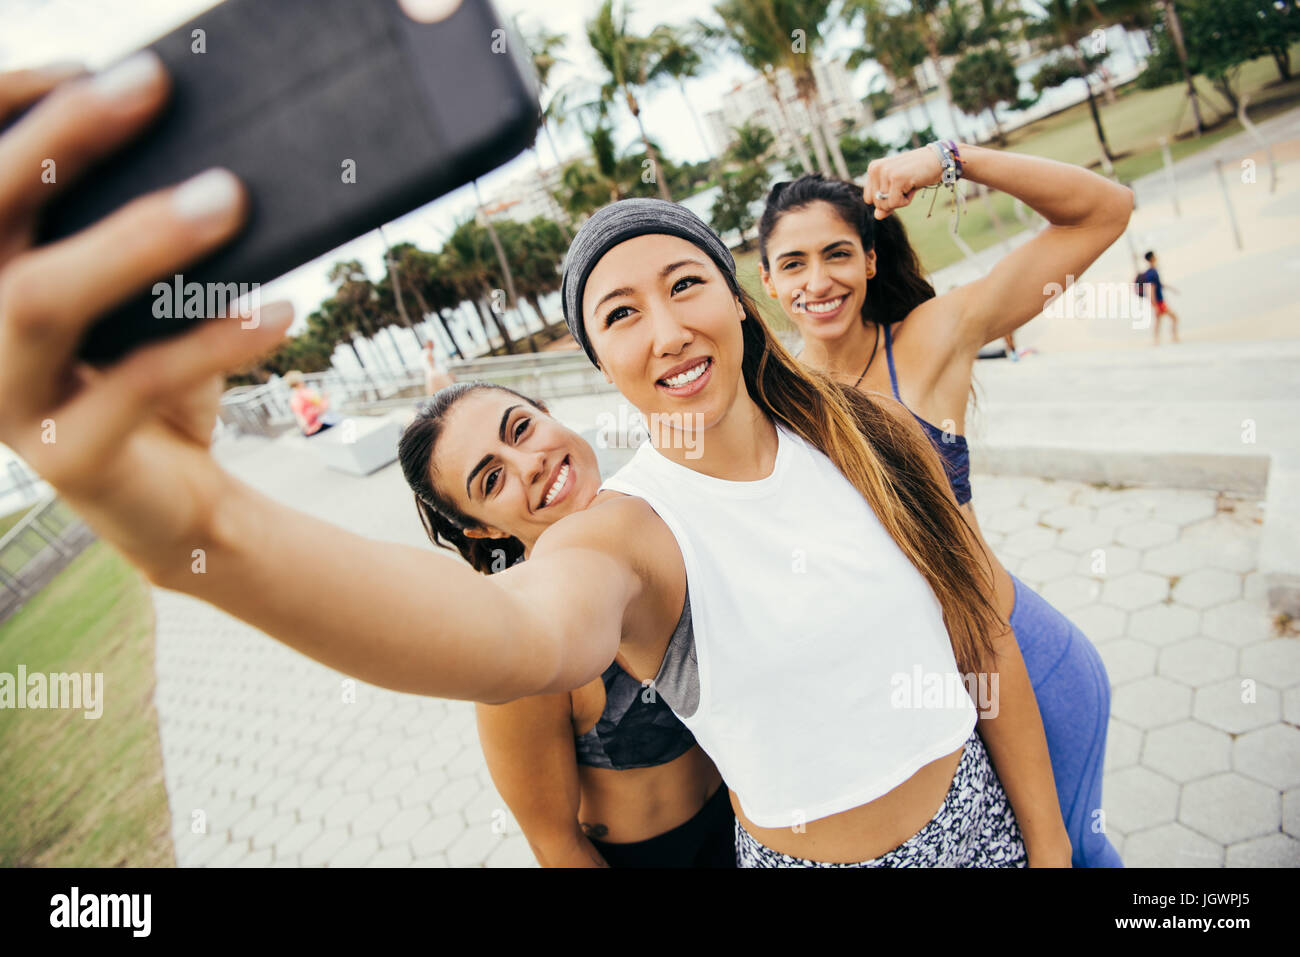 Three female friends, wearing sports clothing, taking selfie using smartphone, South Point Park, Miami Beach, Florida, USA Stock Photo